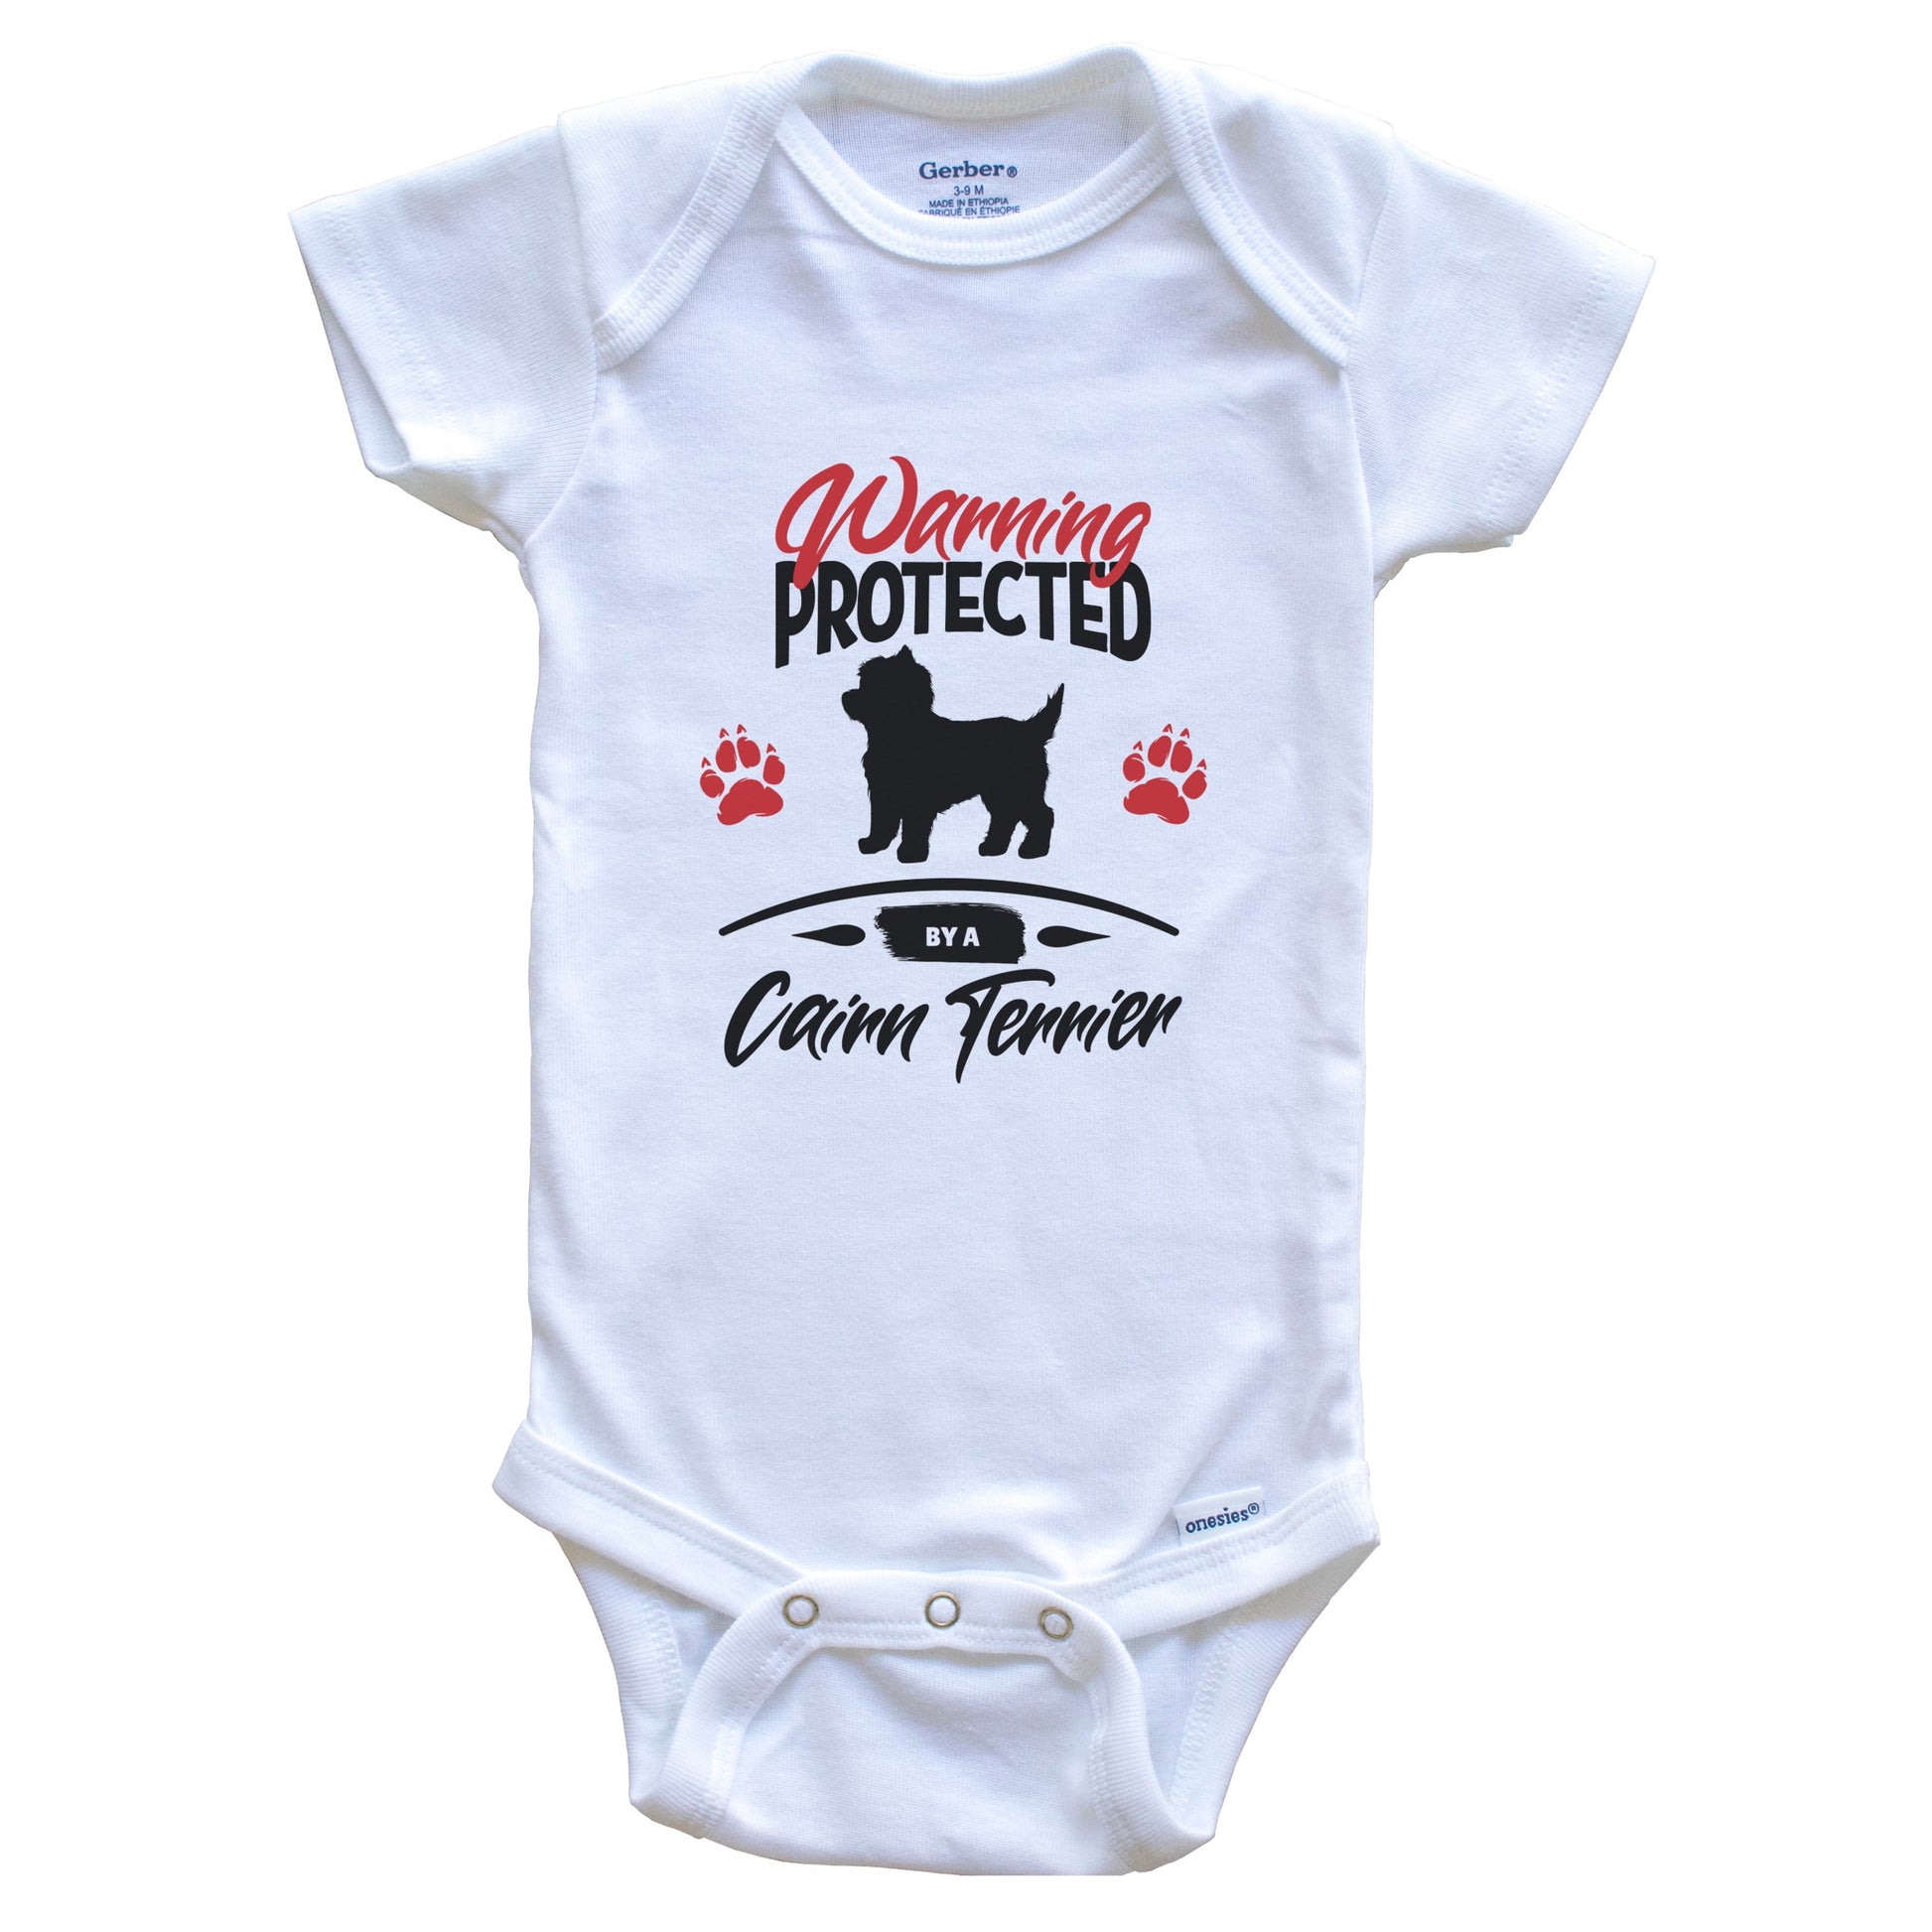 Warning Protected By A Cairn Terrier Funny Dog Owner Baby Bodysuit